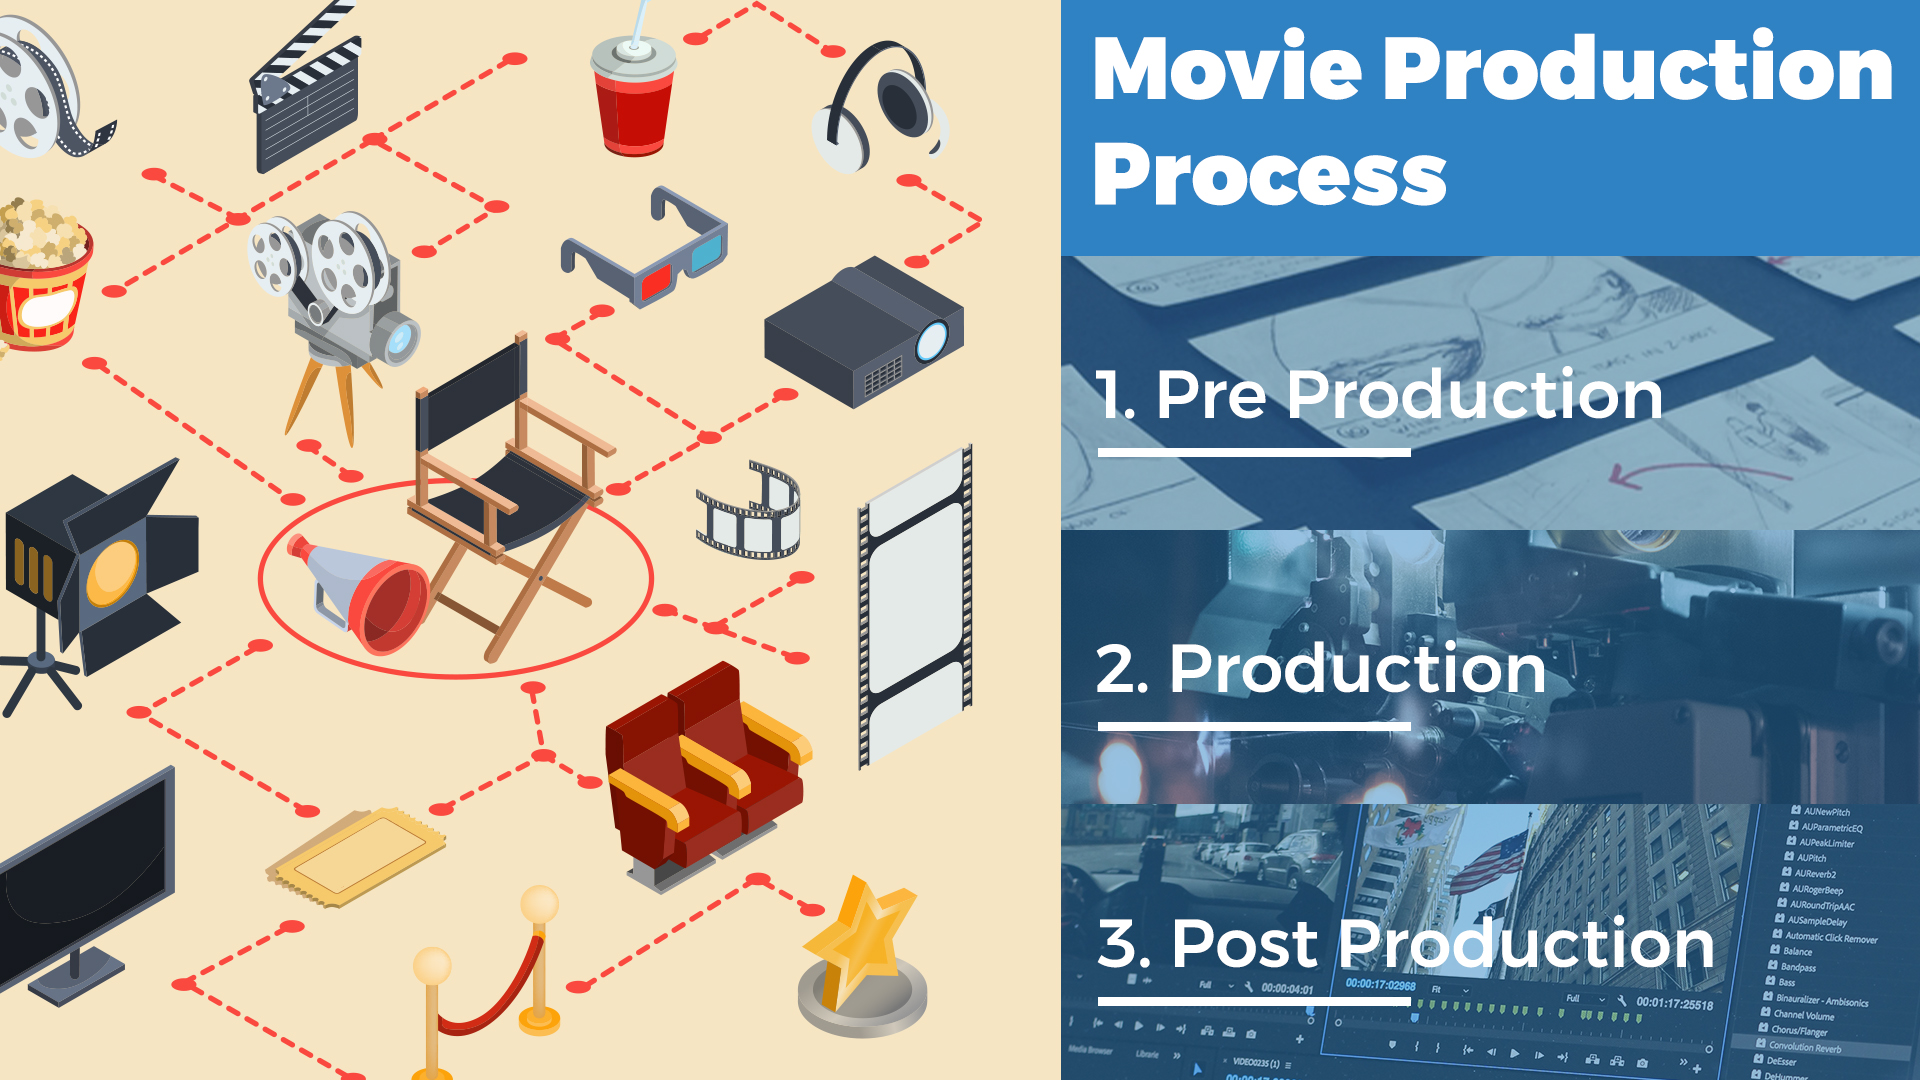 movie_production_process_trootech_business_solutions.jpg